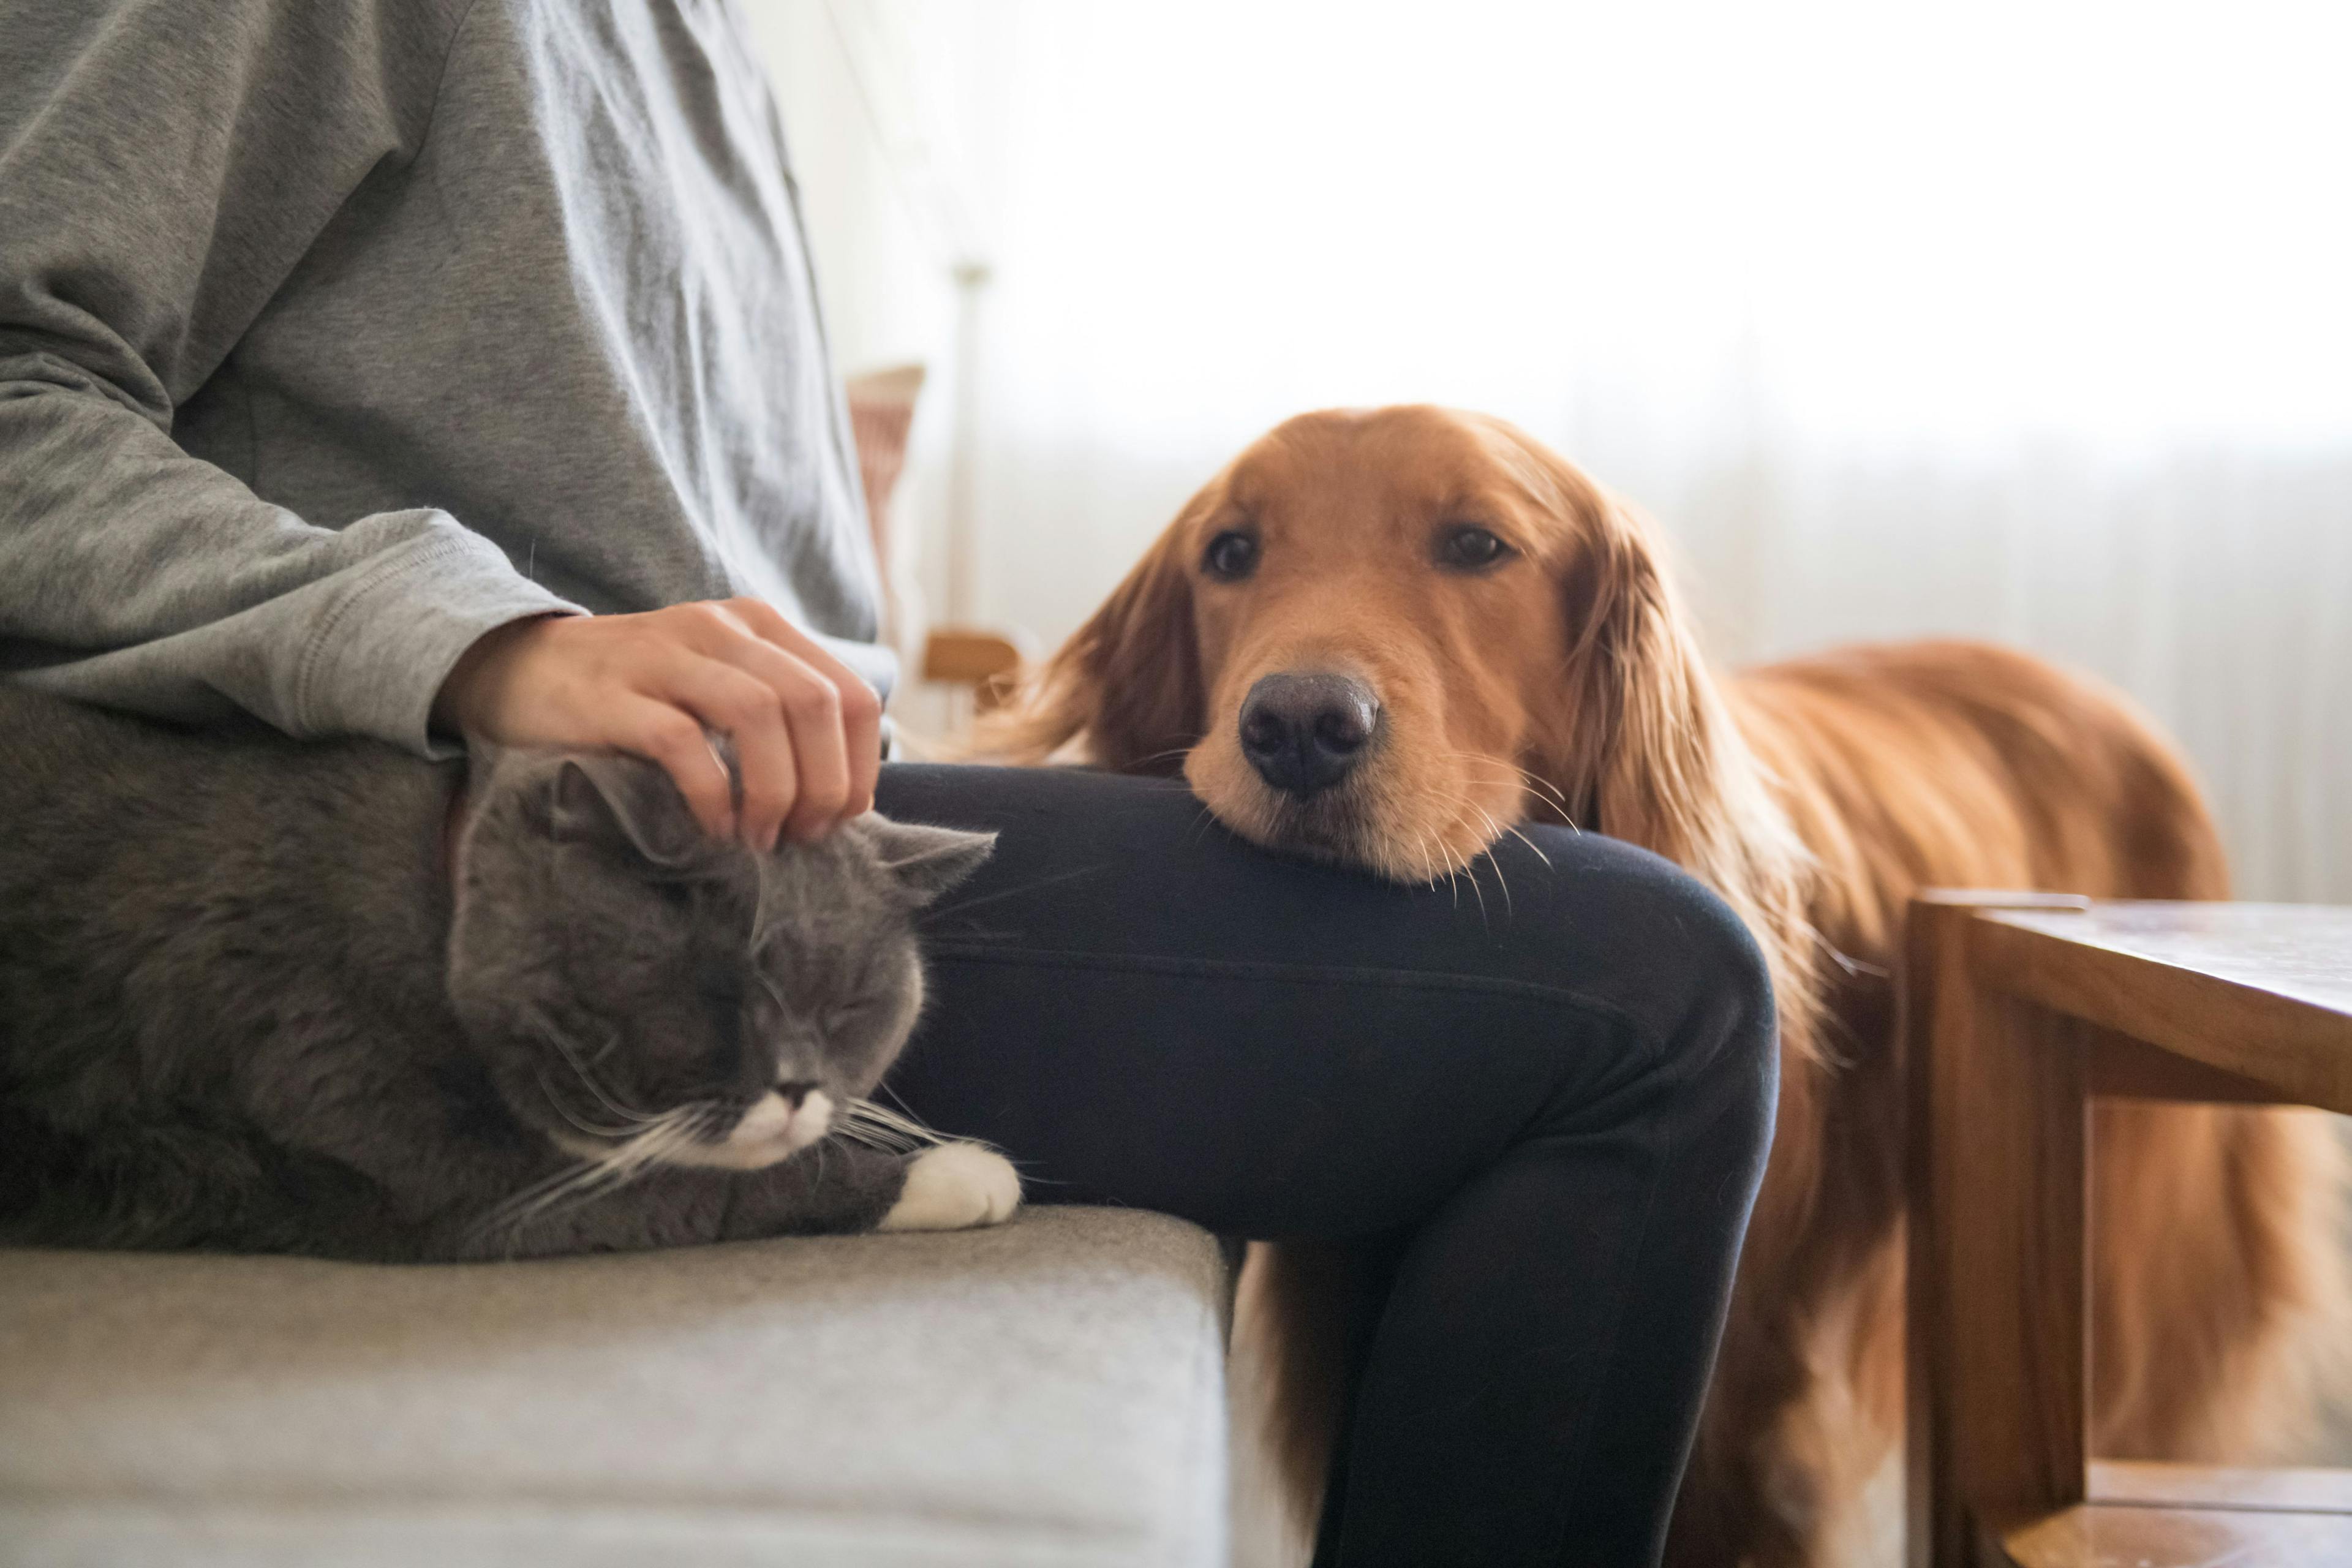 Setting the timetable for sterilizing pets